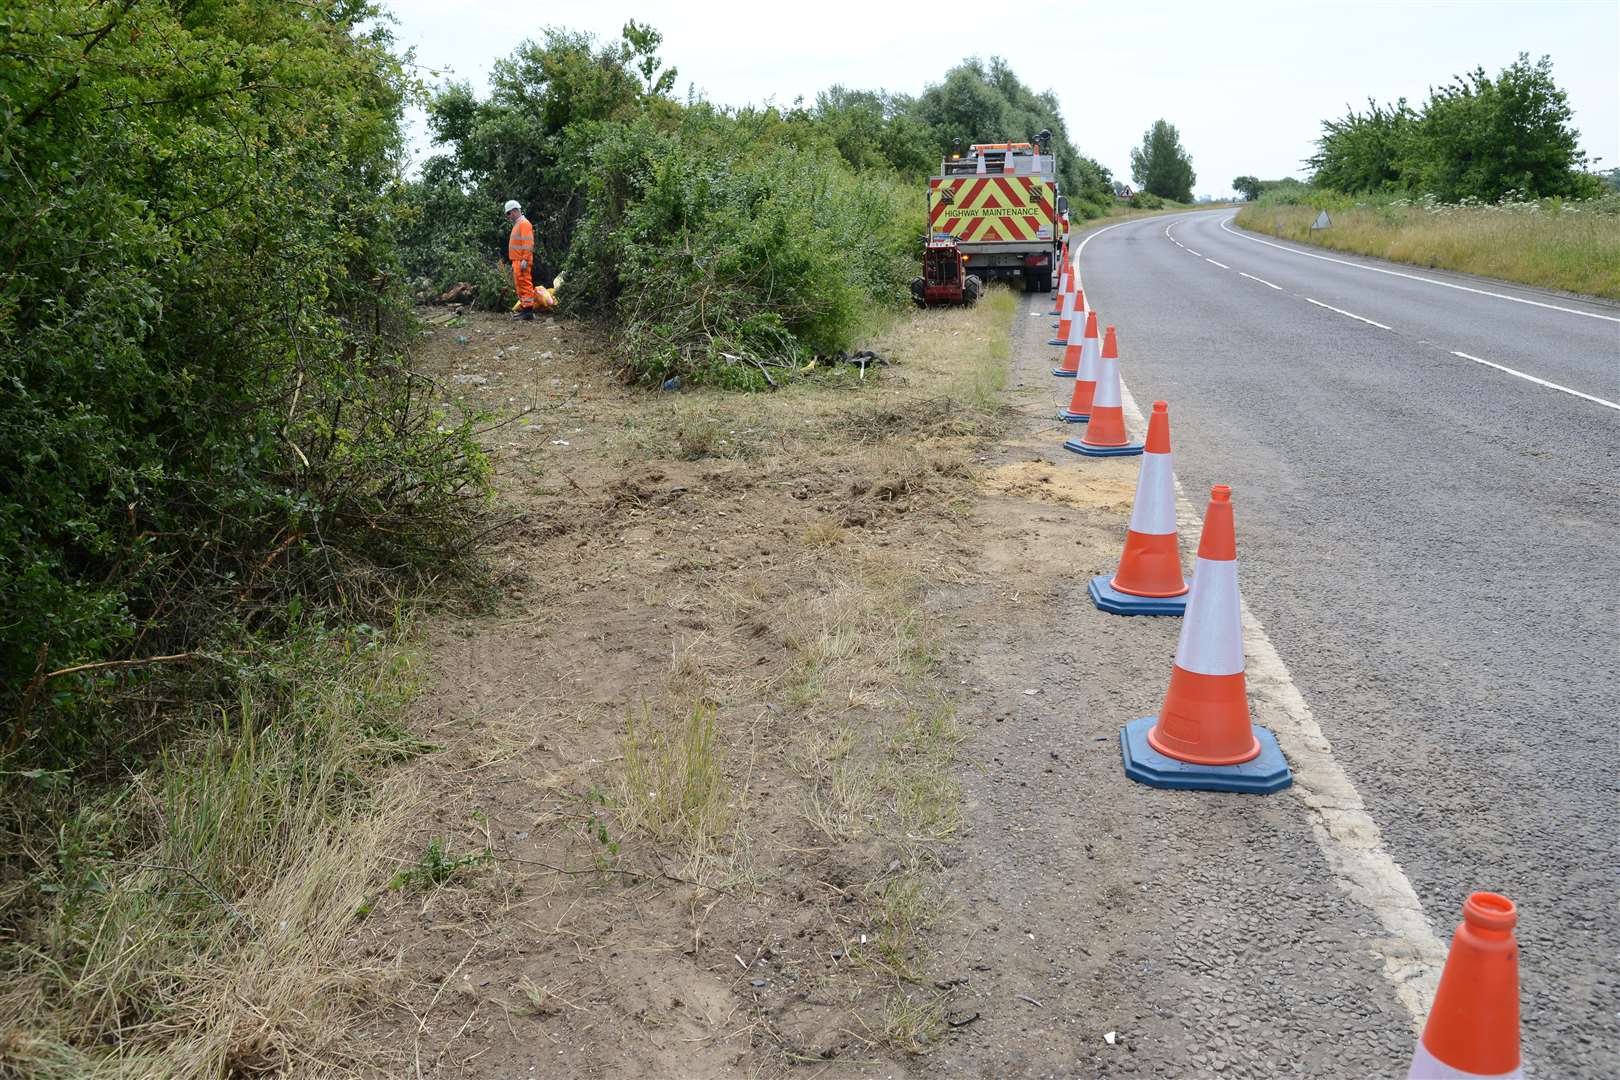 Traffic cones left by highway workers dealing with the A2070 crash.